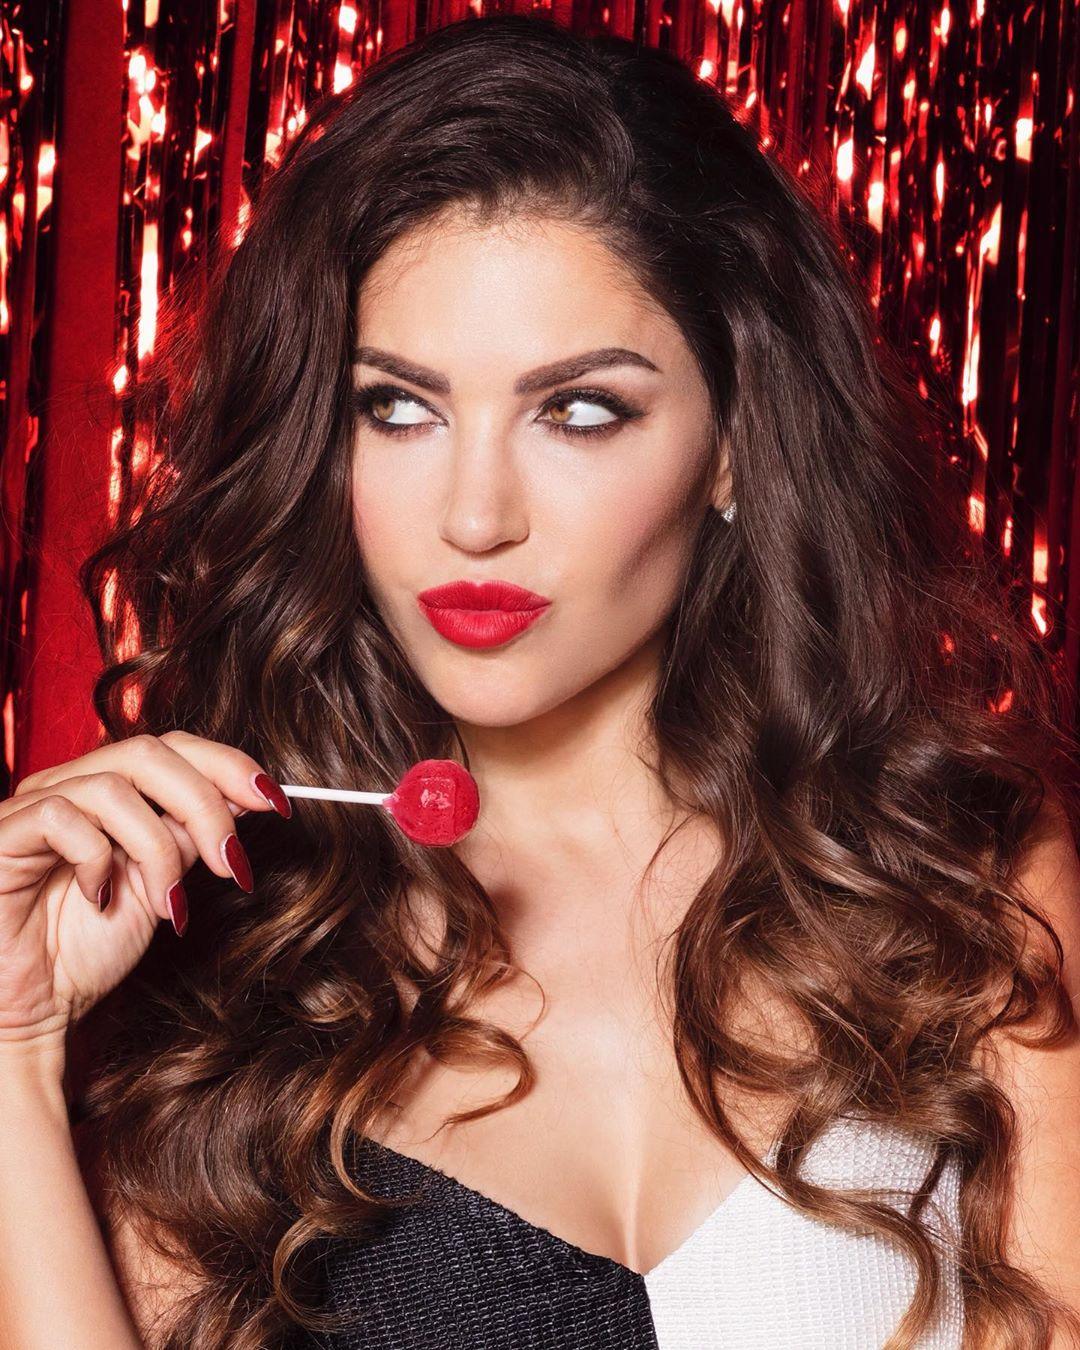 61 Sexy Yolanthe Cabau van Kasbergen Boobs Pictures Which Will Leave You Amazed And Bewildered 577